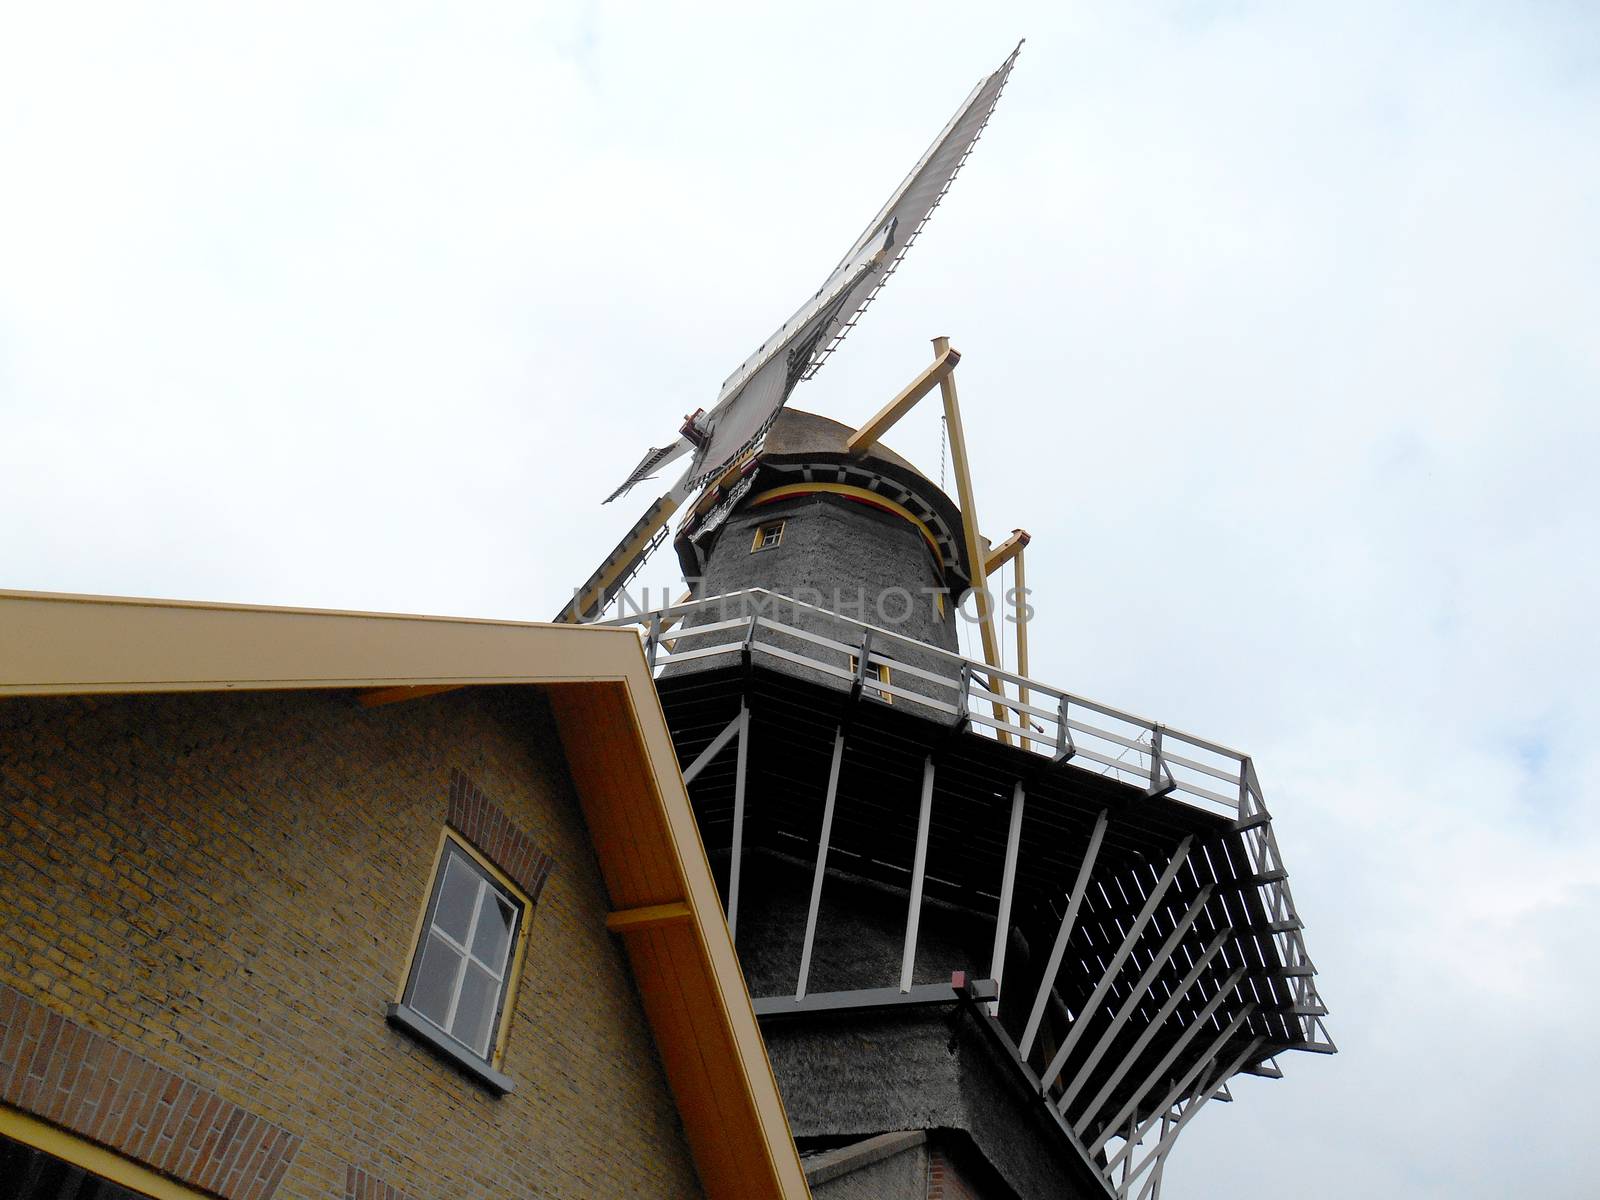 Close up view of a windmill.

Picture taken on August 15, 2013.